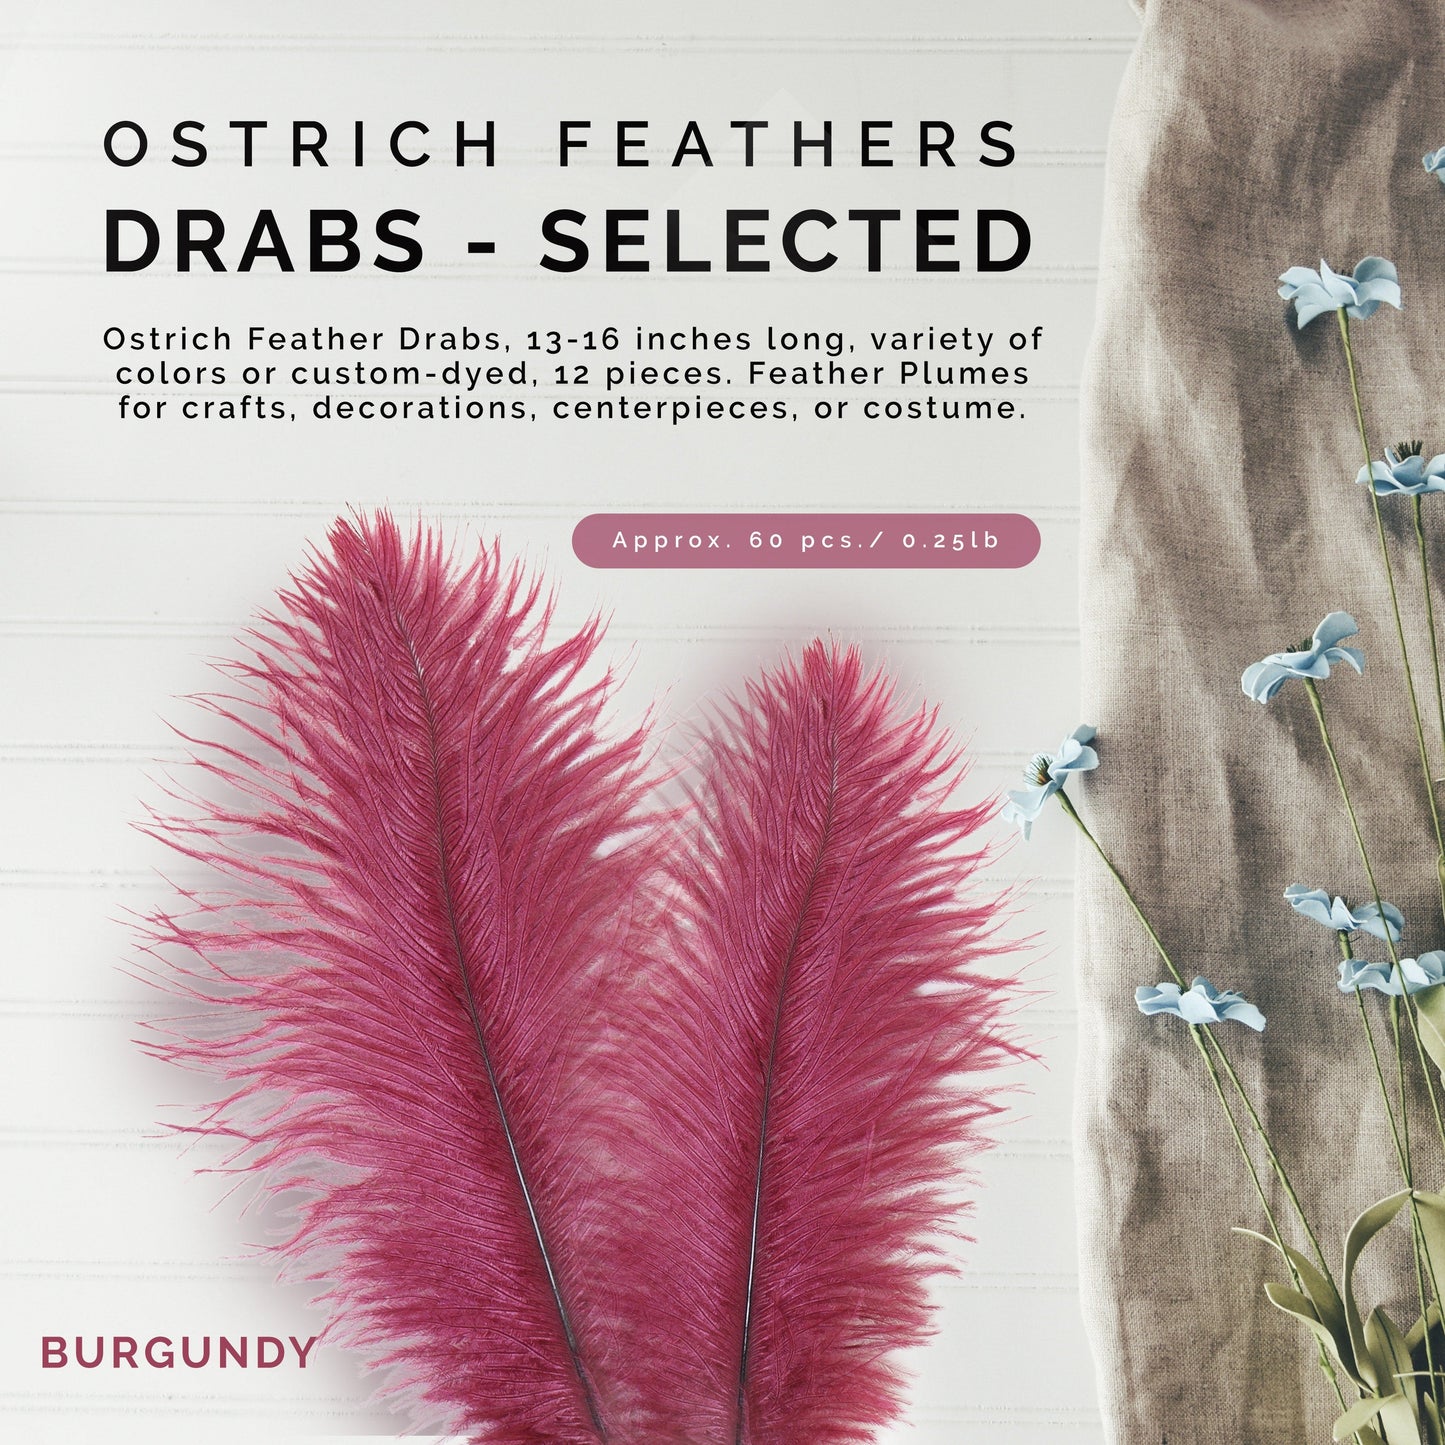 Ostrich Feathers 13-16" Drabs - Burgundy